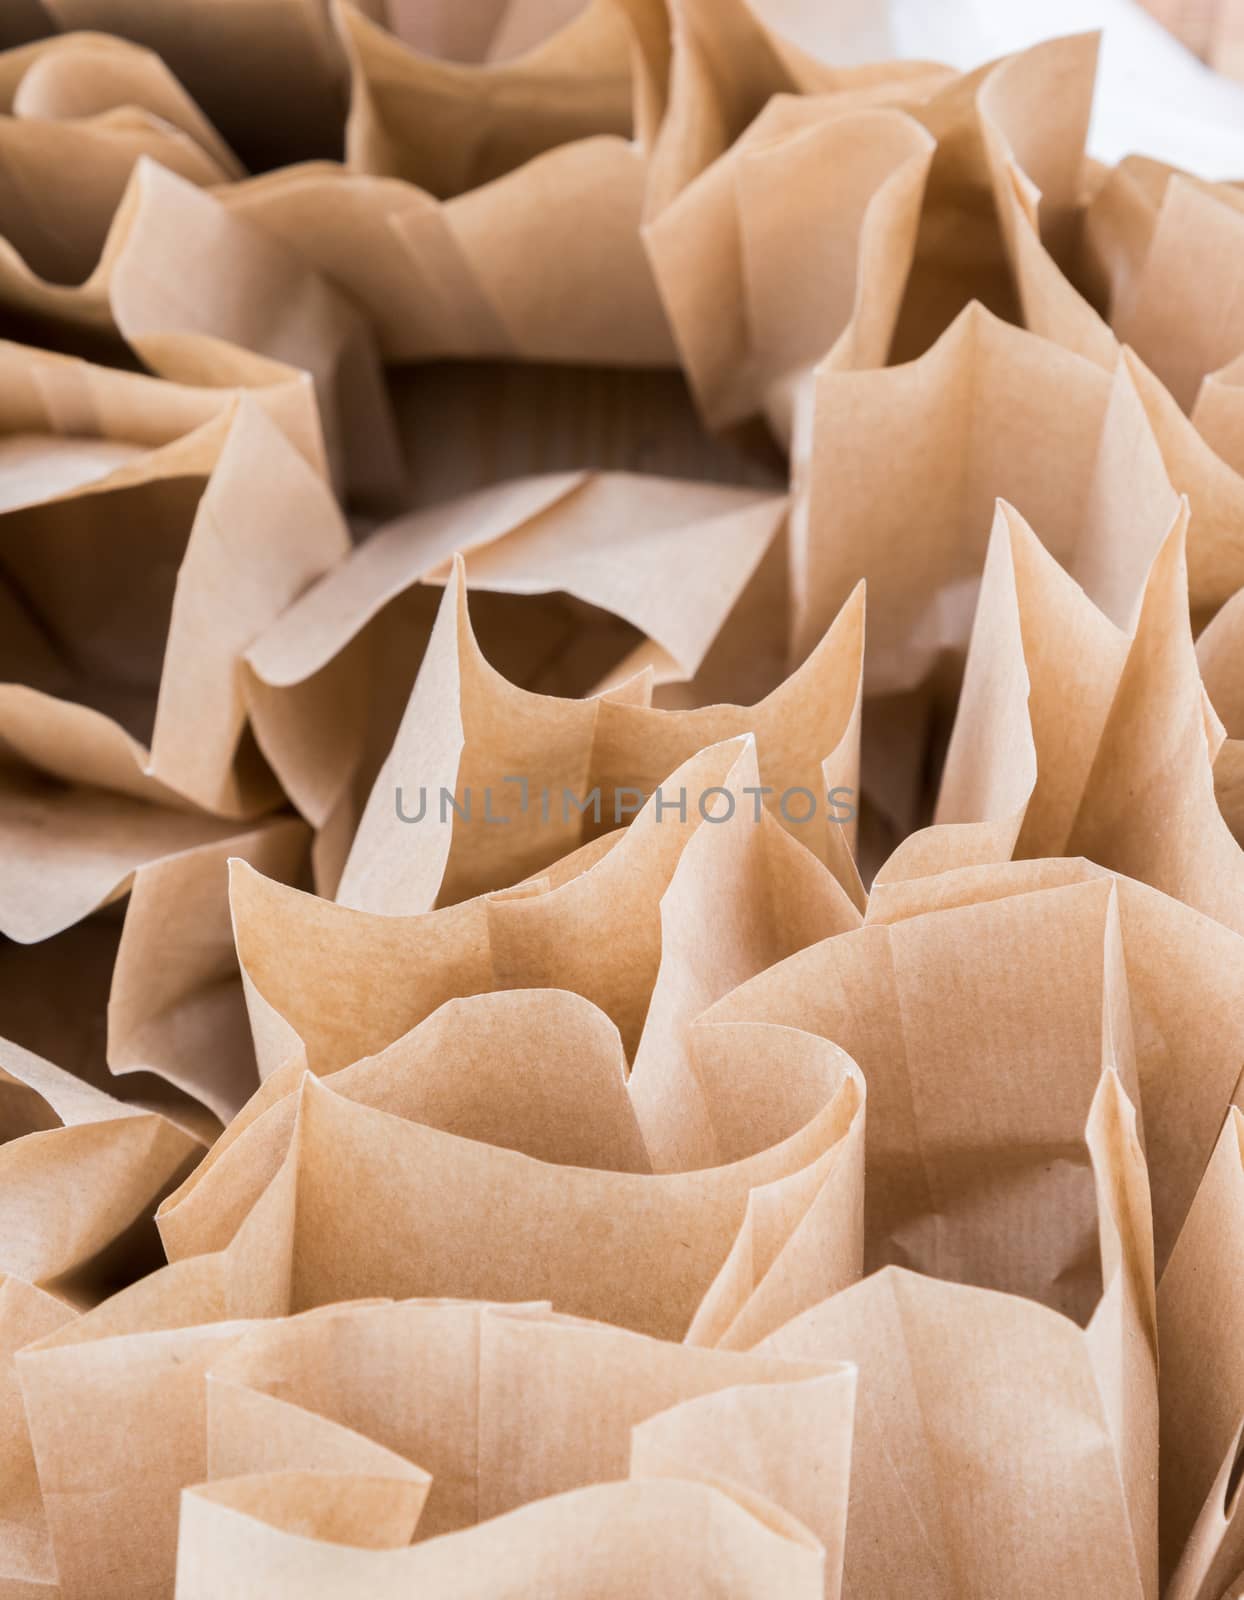 Brown paper disposable bags in the pile by vlaru